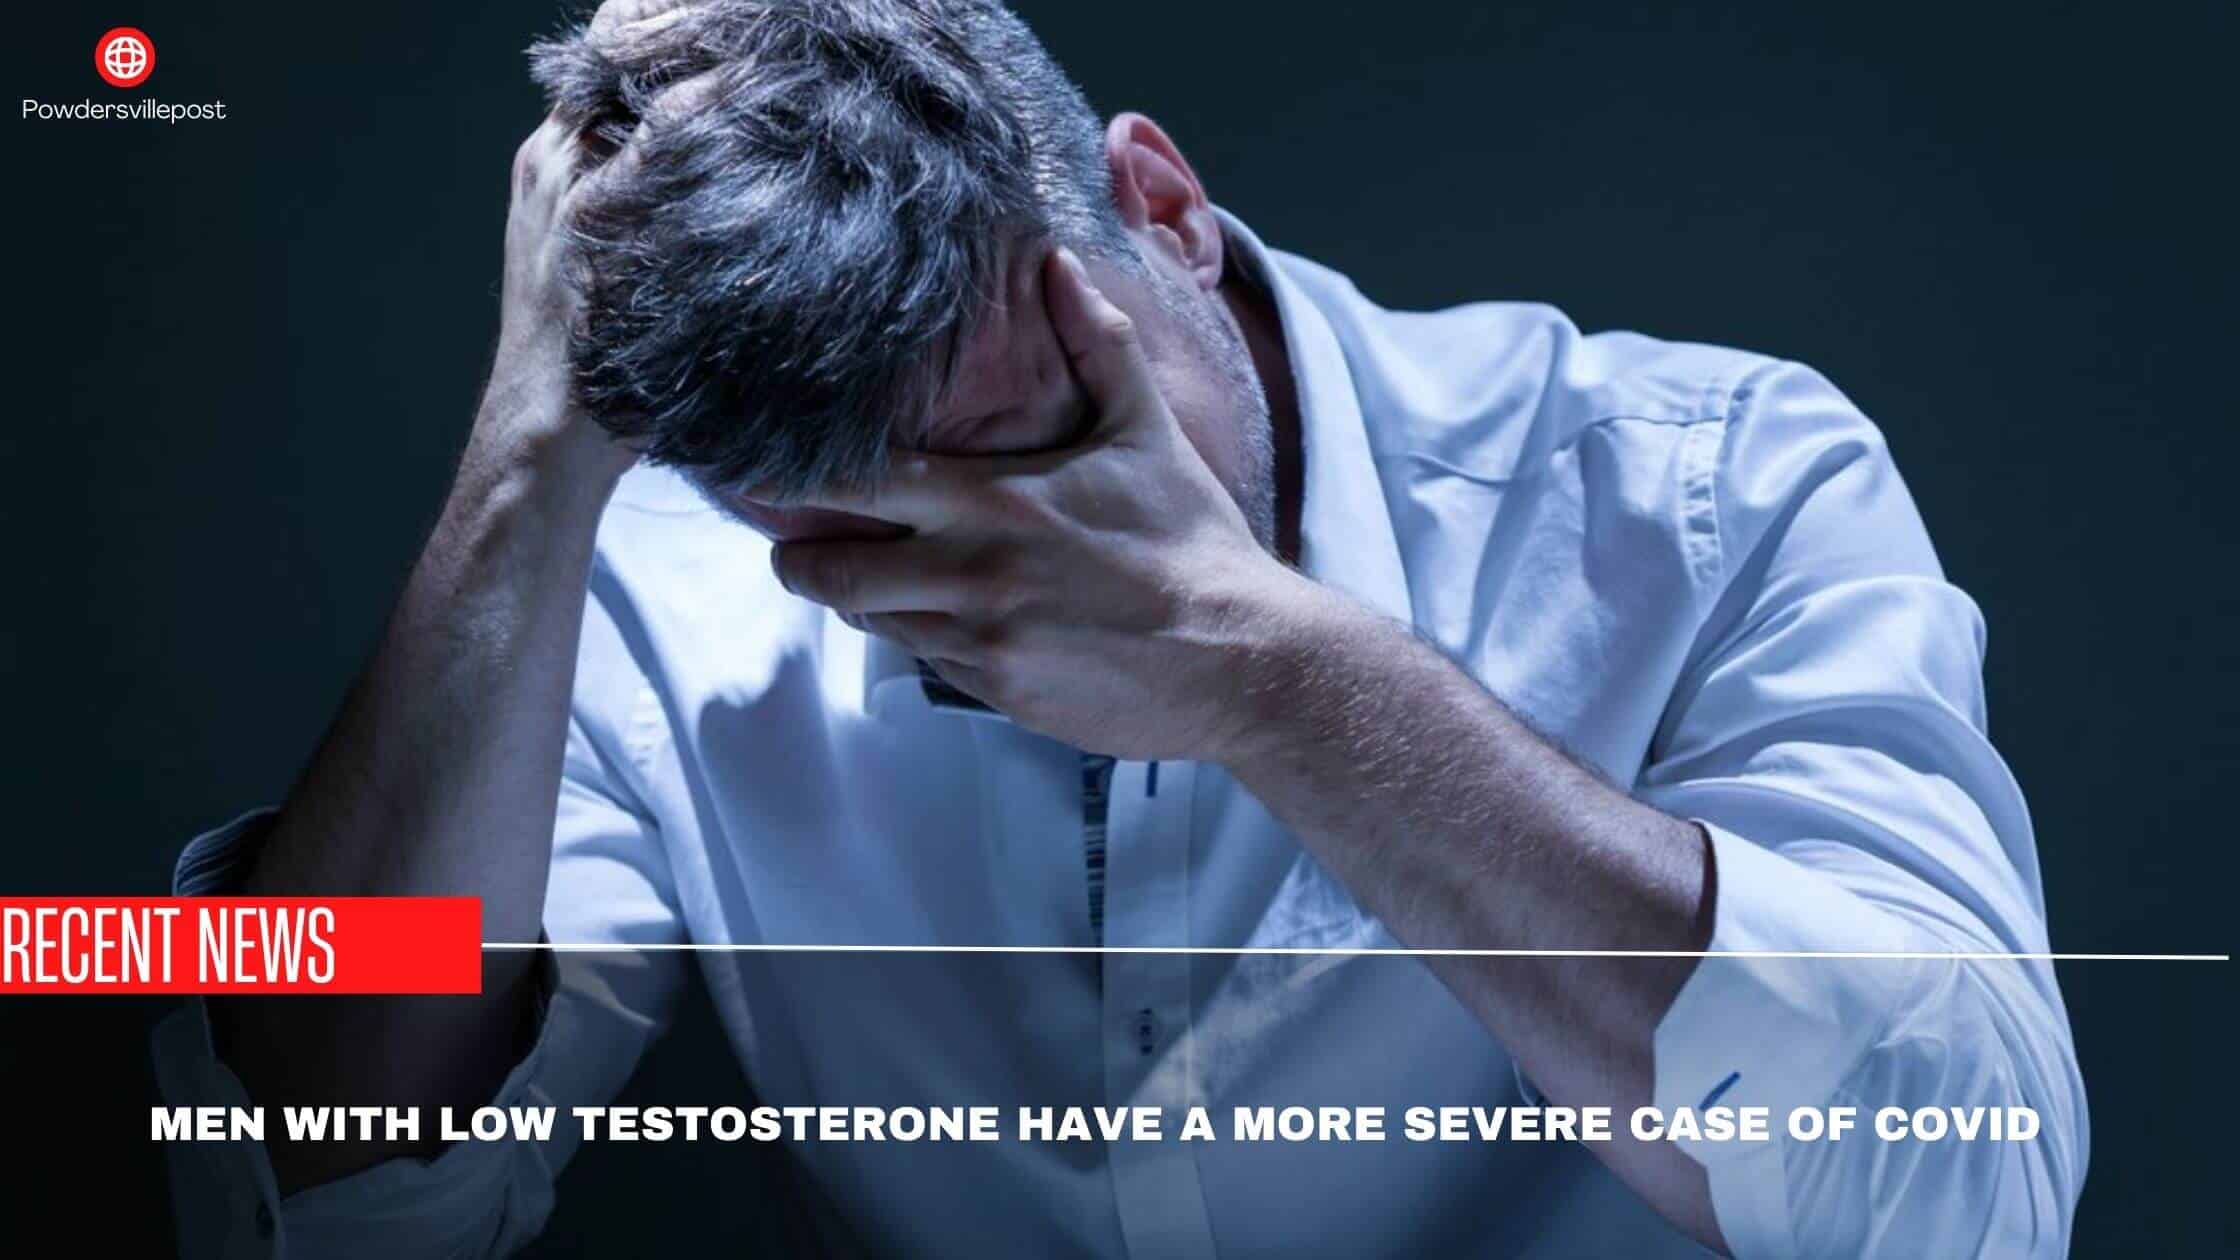 Men With Low Testosterone Have A More Severe Case Of Covid